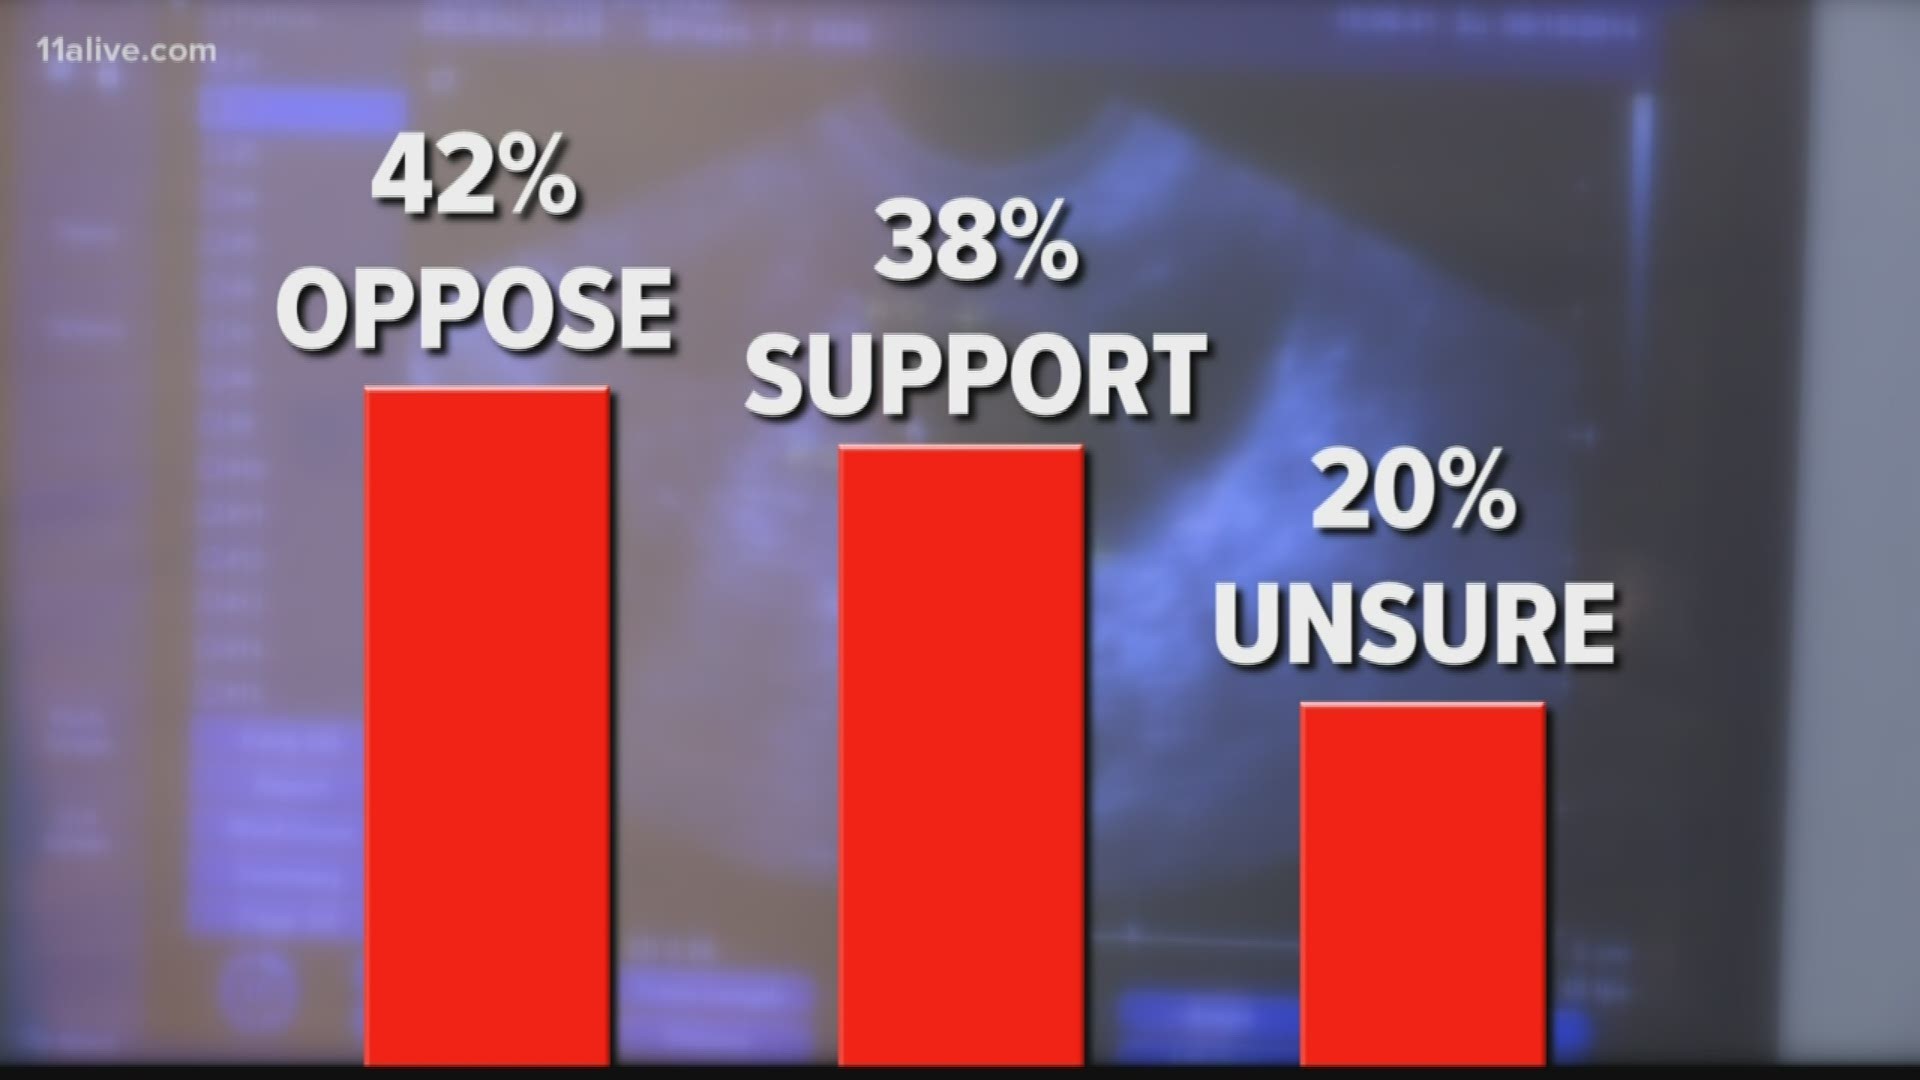 Most voters oppose the law, but not by a large margin.